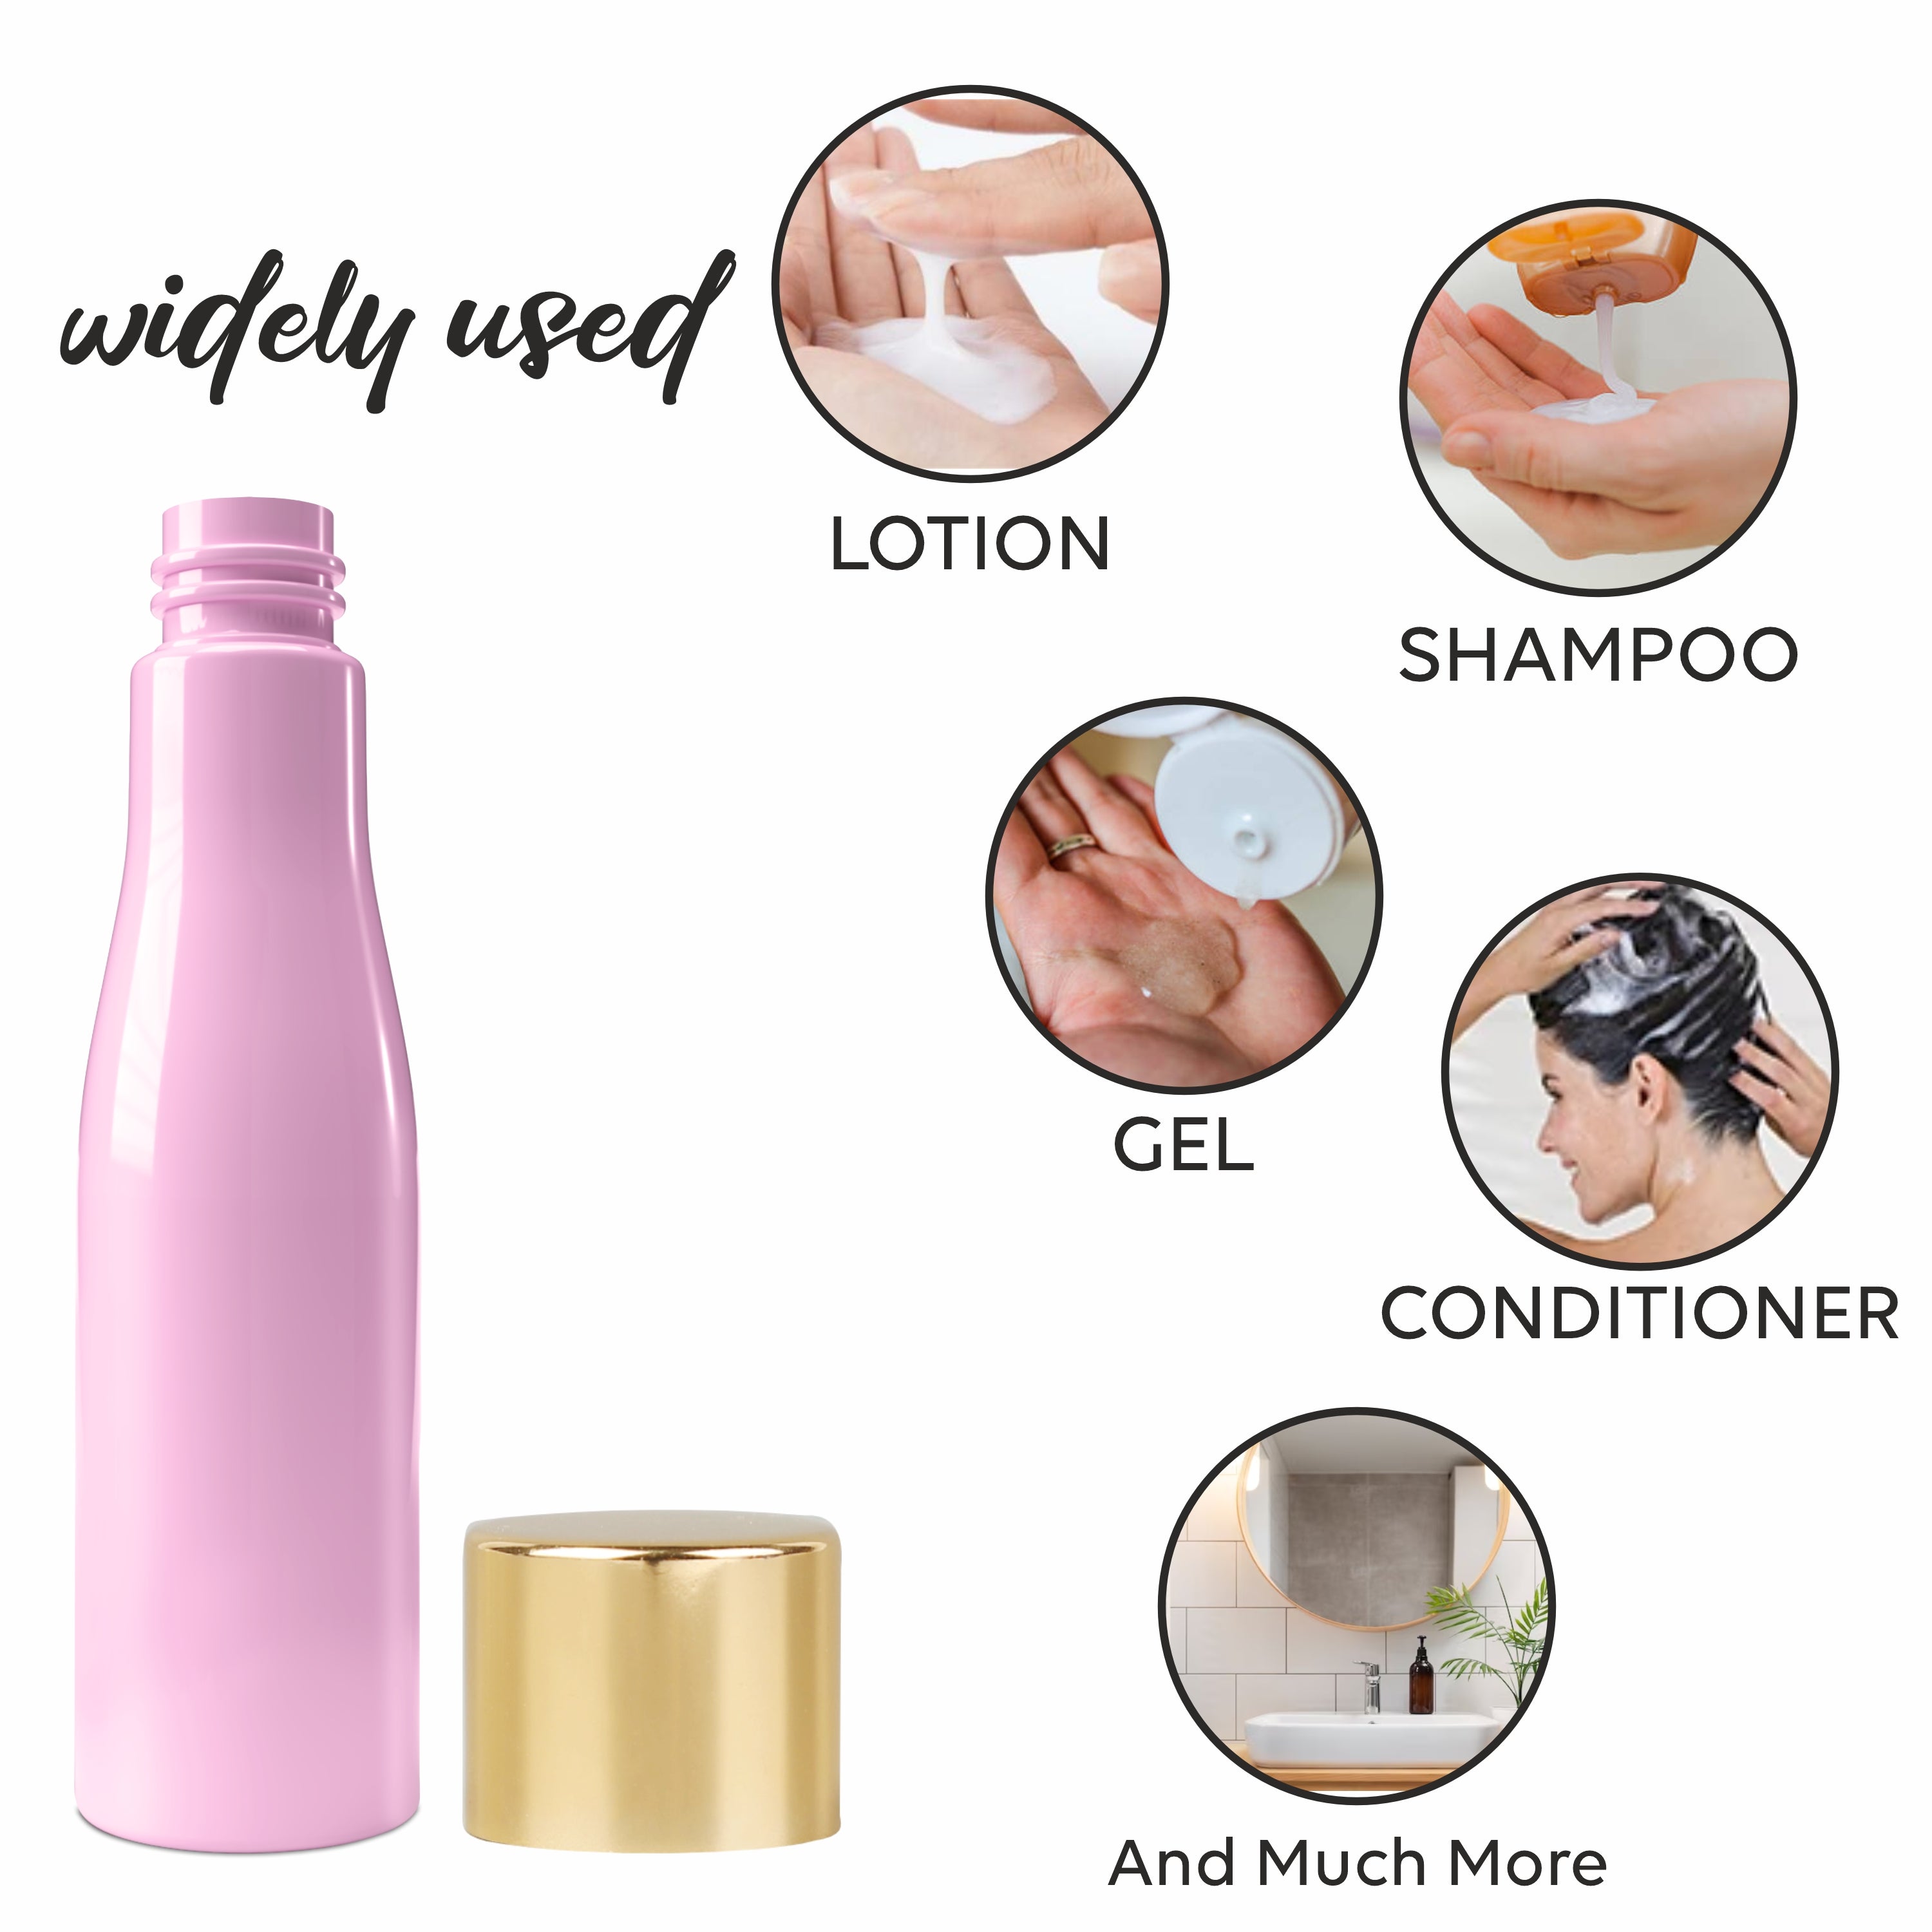 |ZMP08| LIGHT PINK ASTA PET BOTTLE WITH GHOLD PLATED SCREW CAP Available Size: 100ml